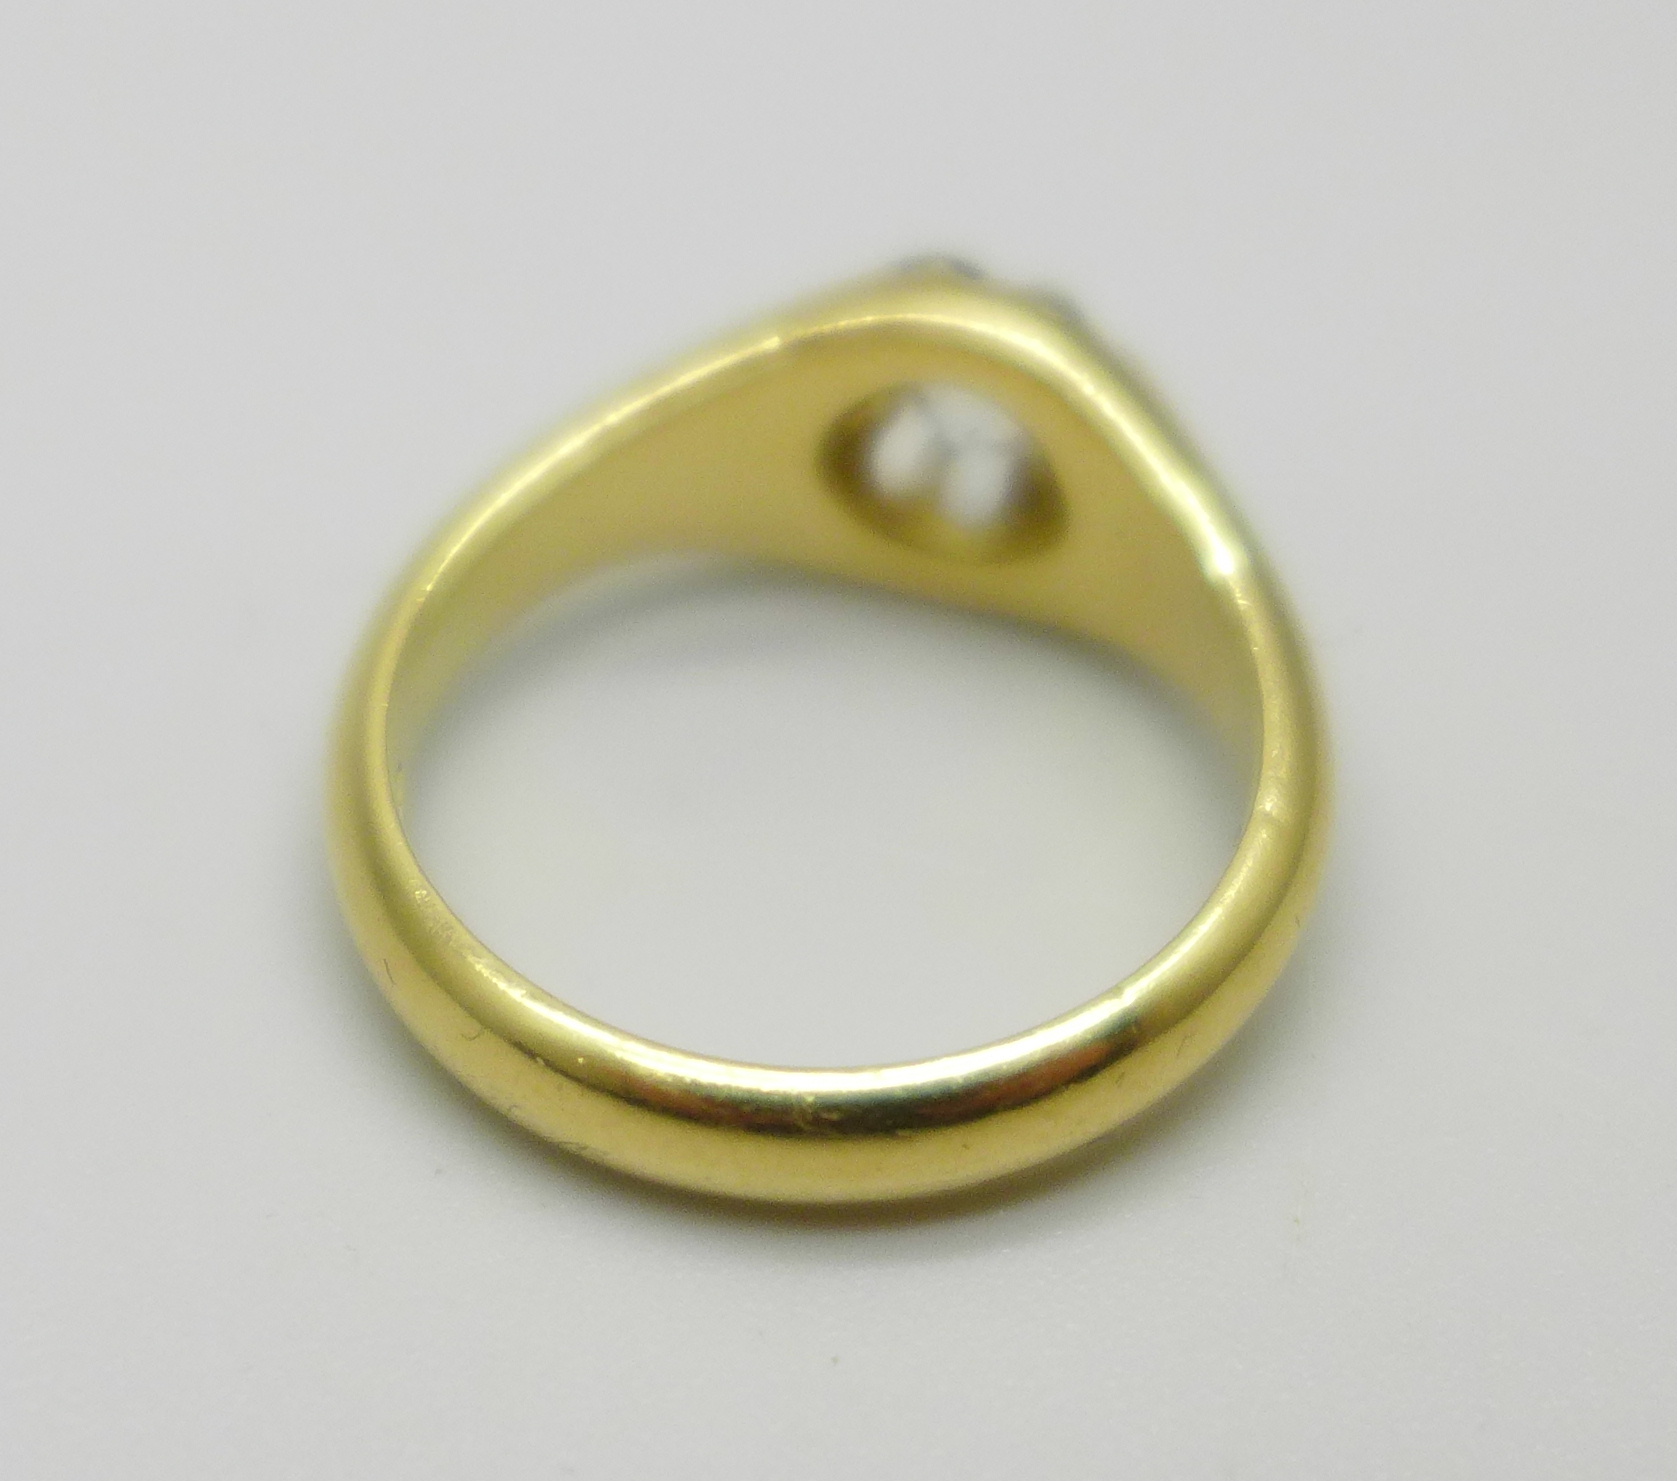 An 18ct gold and diamond ring, Birmingham 1914, approximately 0.5ct diamond weight, 5.9g, L - Image 3 of 4